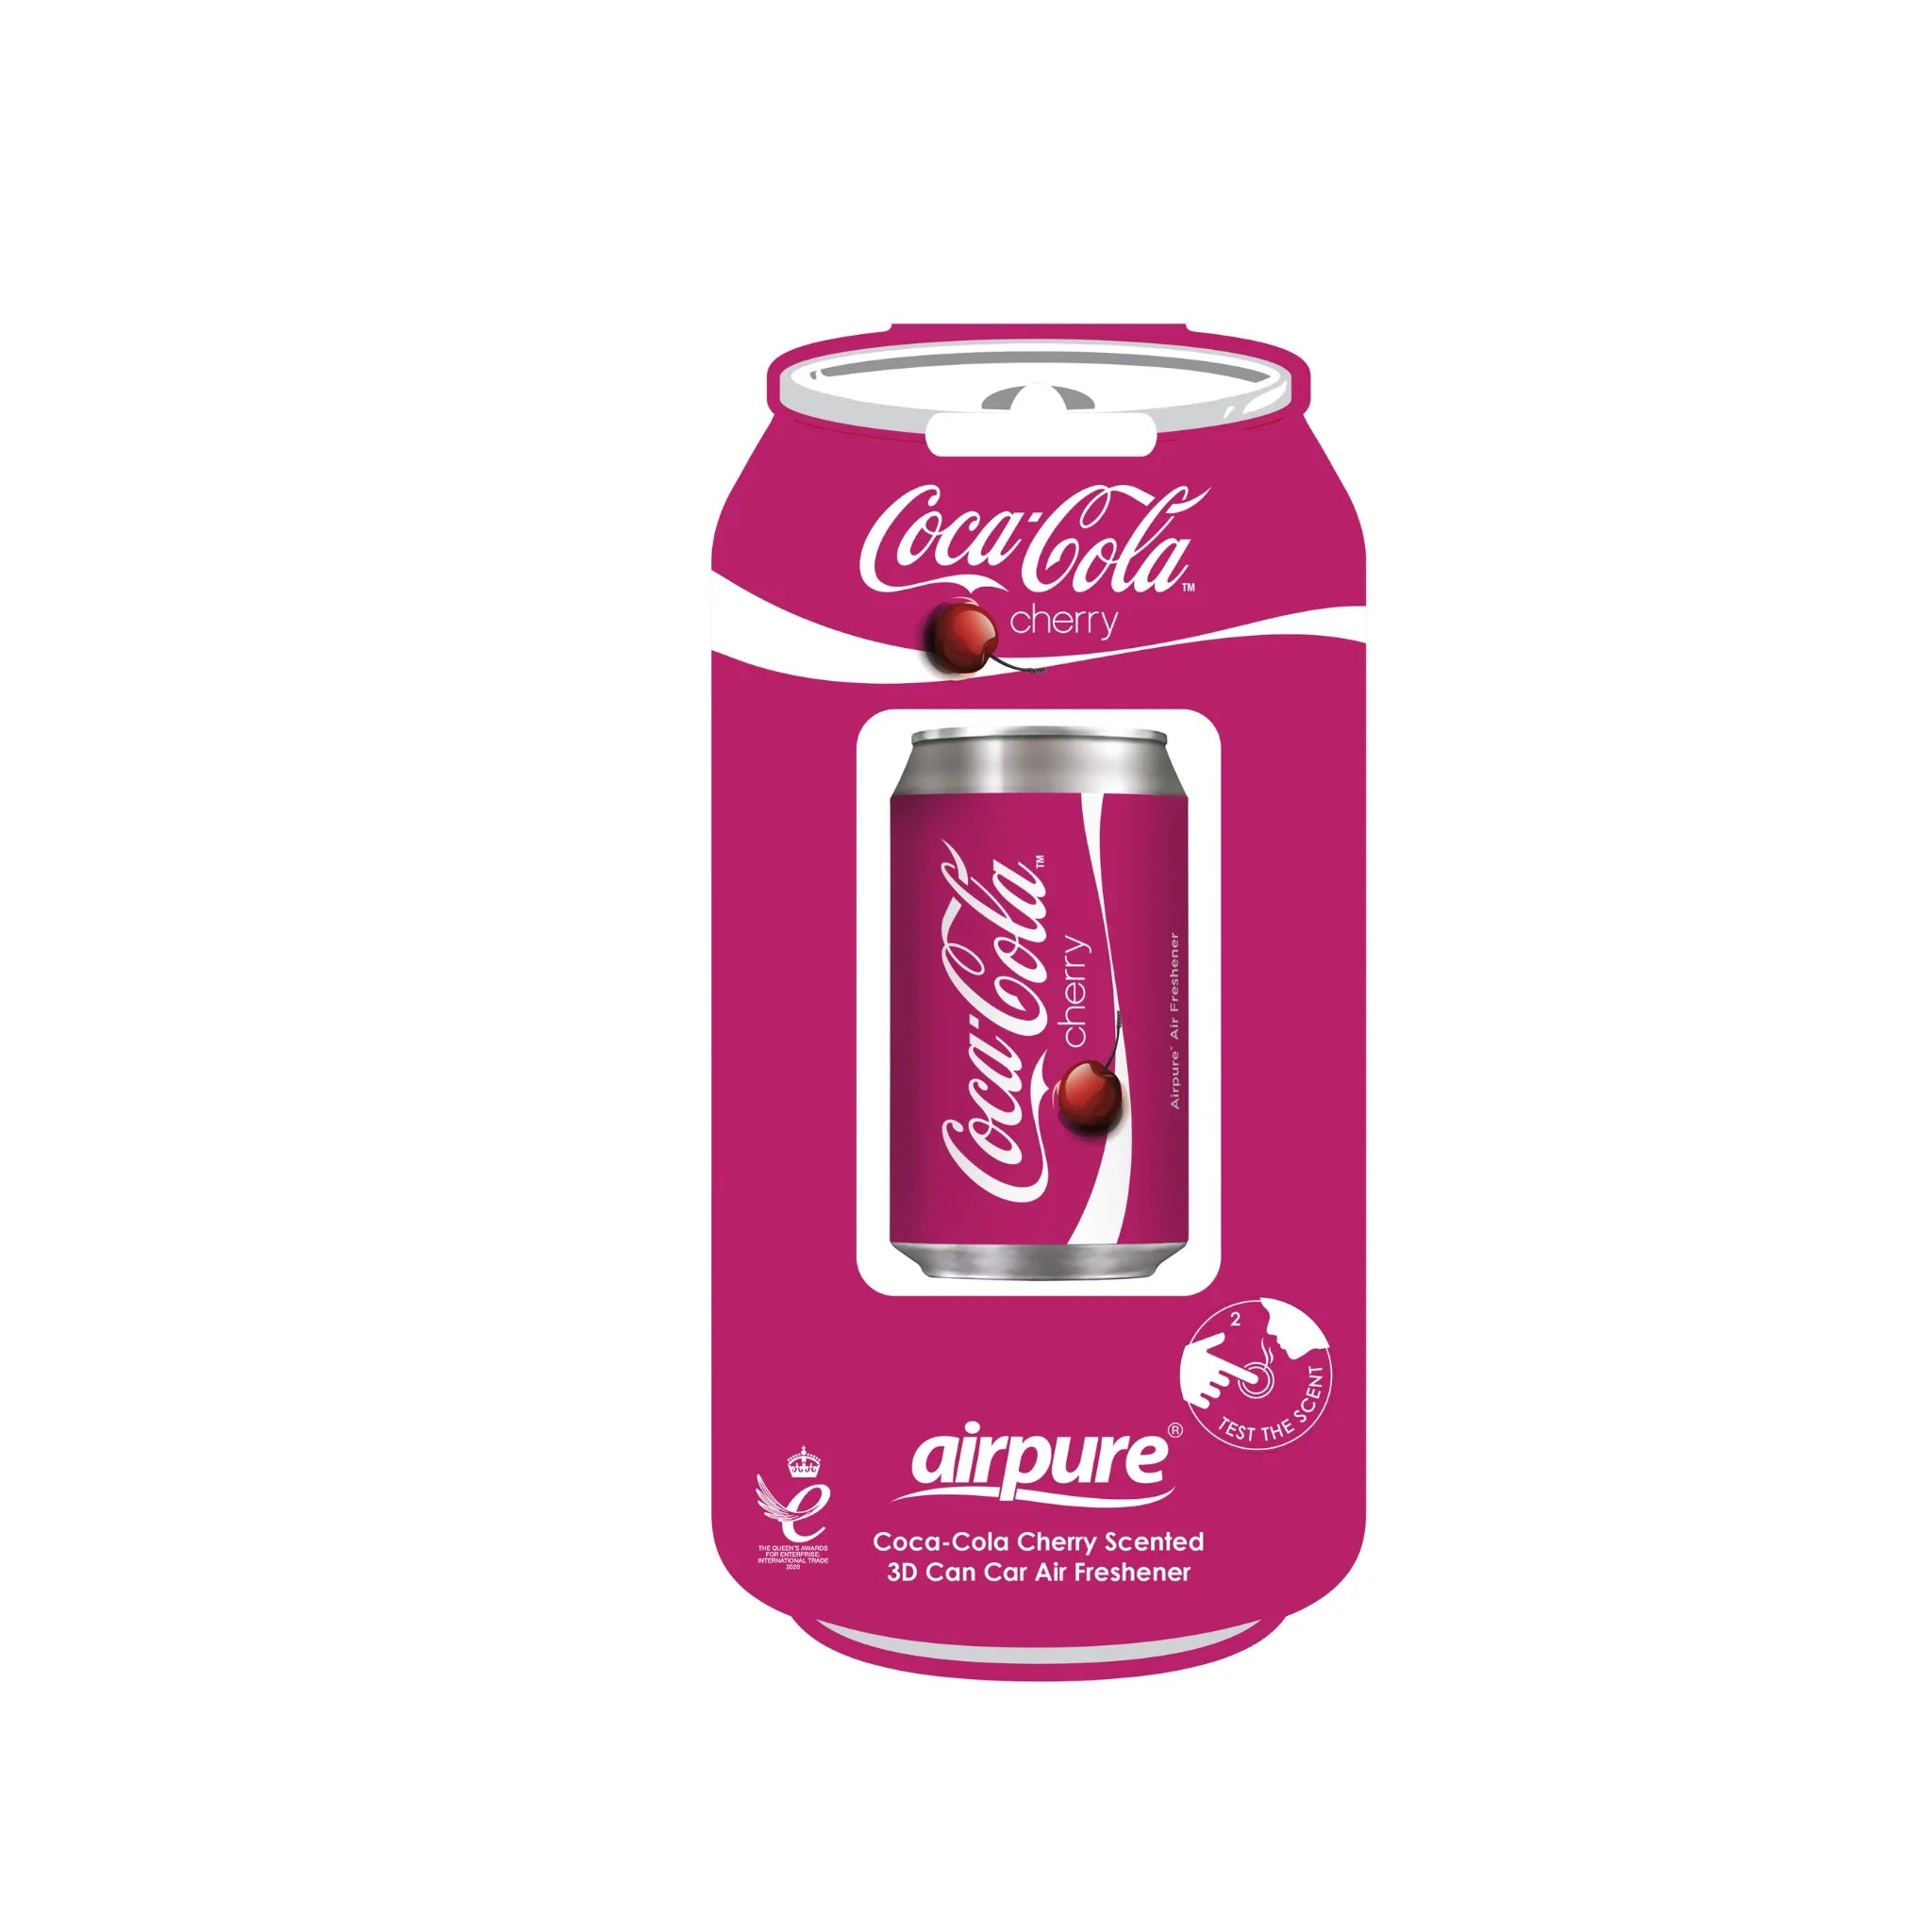 Airpure 3D Vent Can Air Freshener - Coca Cola Cherry